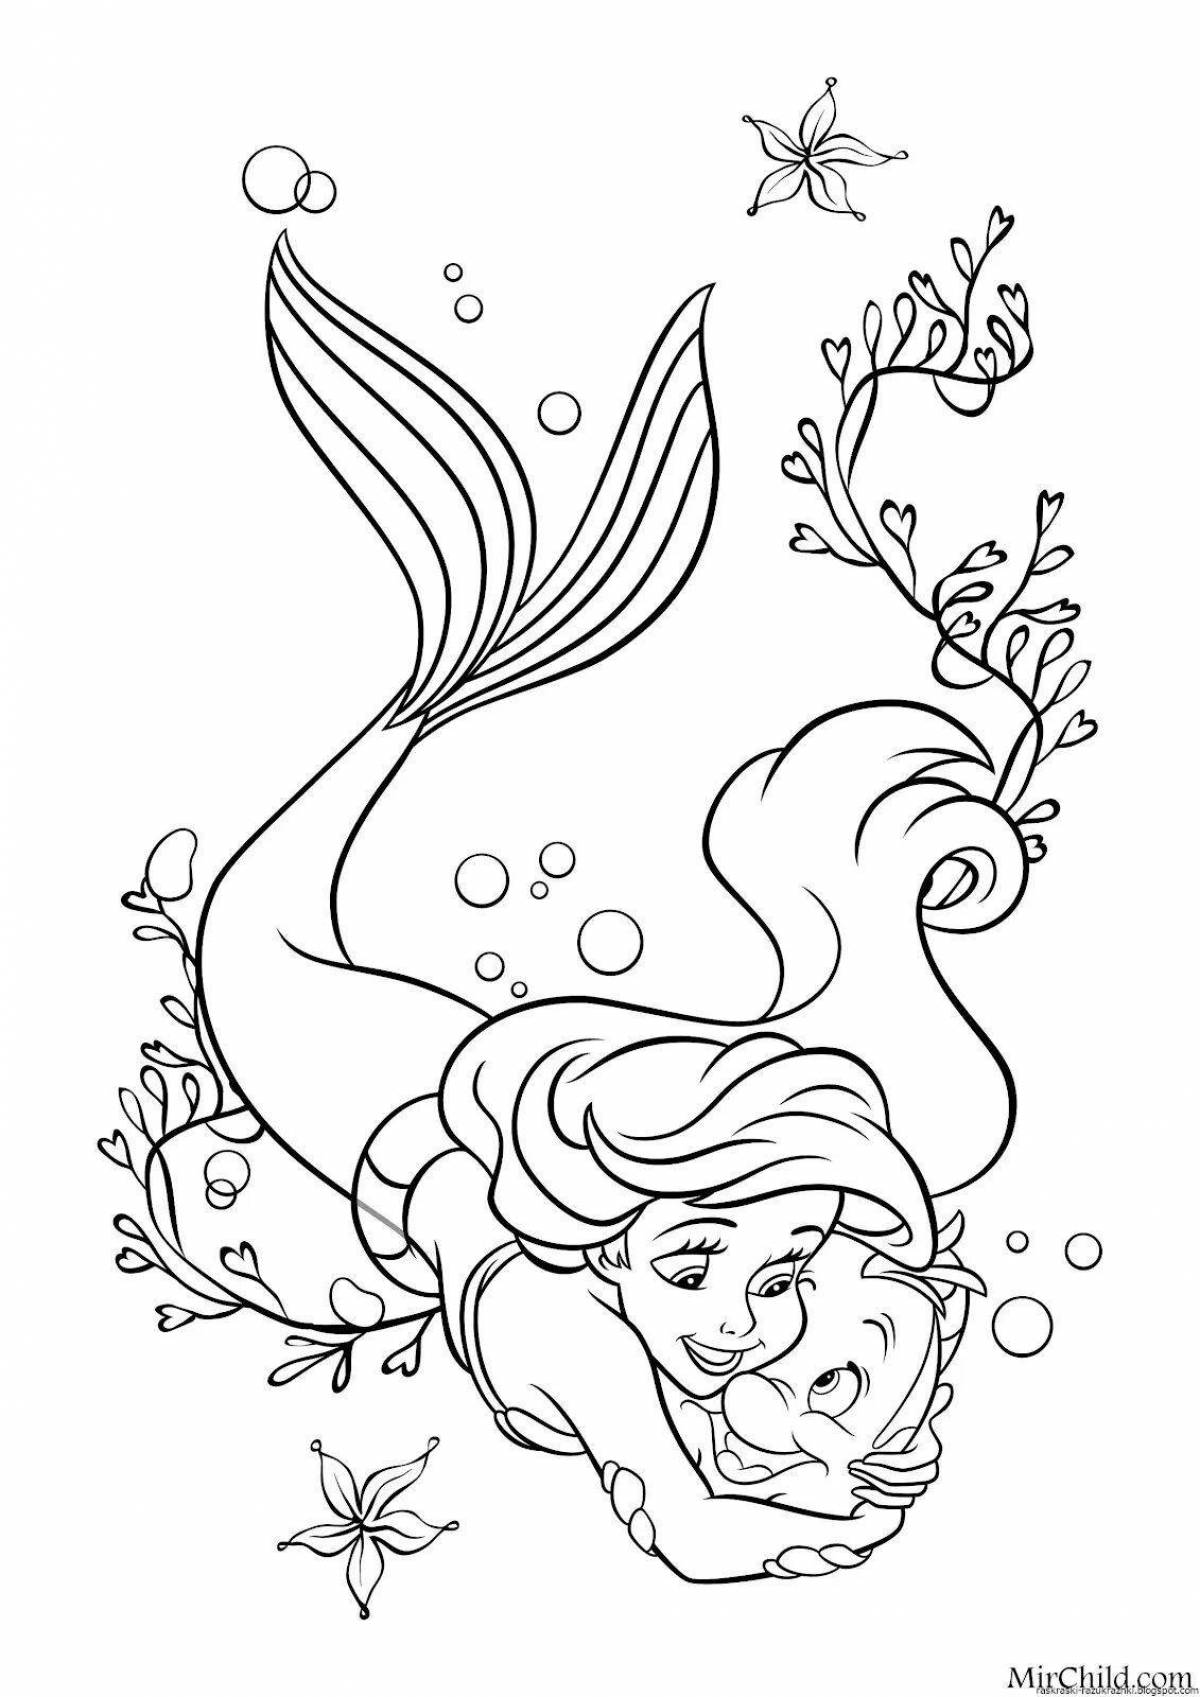 Playful ariel the little mermaid coloring book for girls